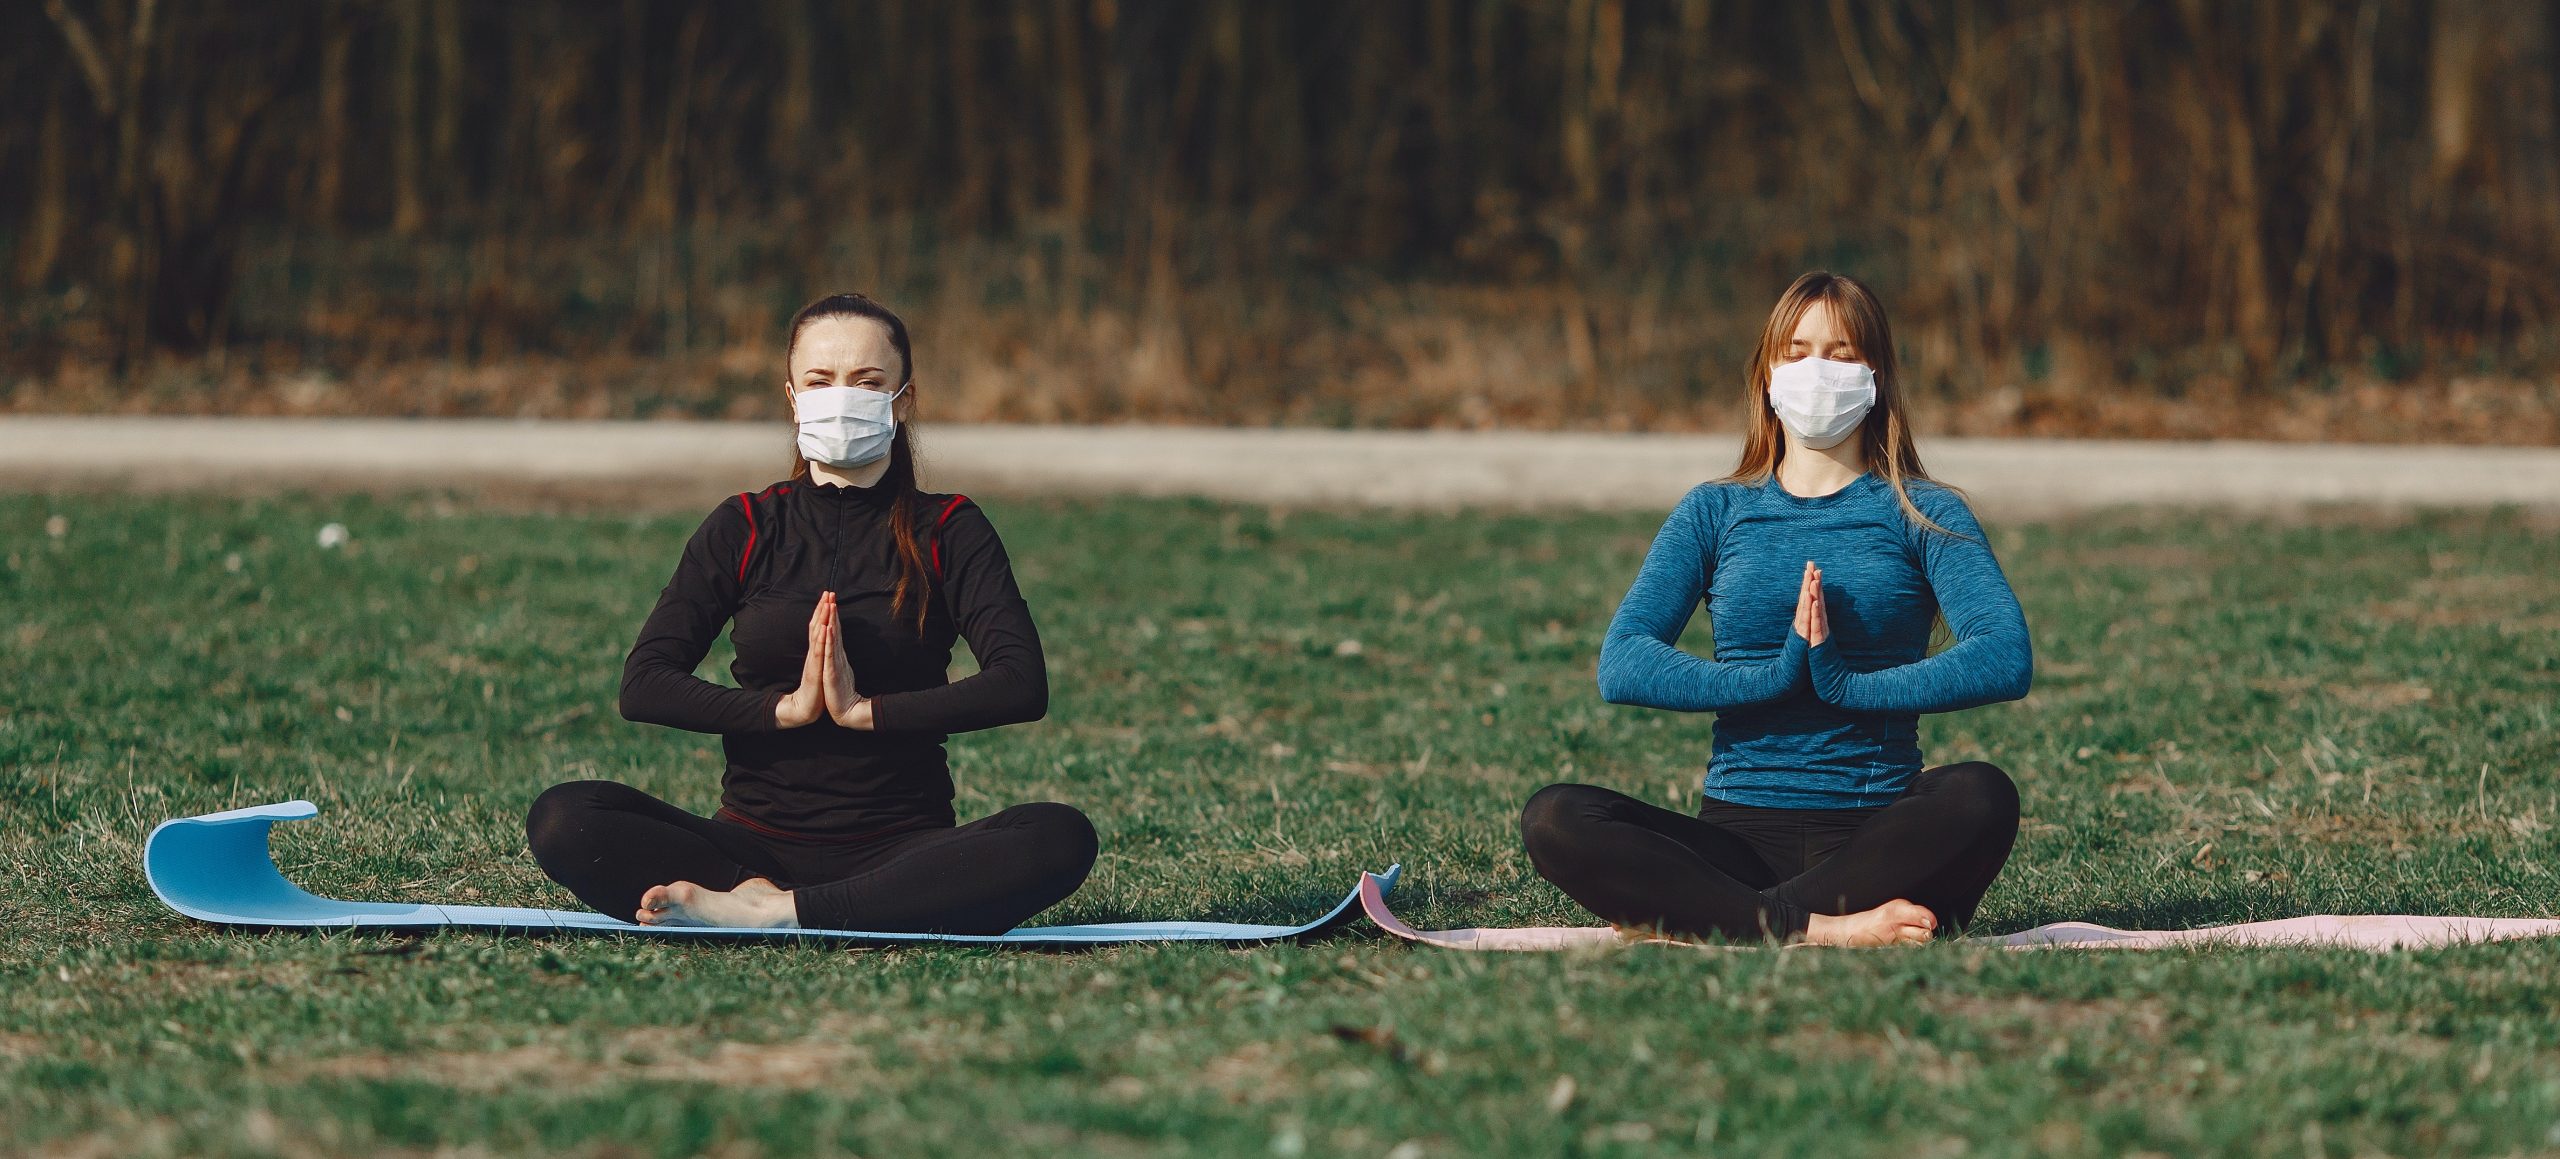 Two women do yoga outside. They are six feet apart and wear face masks.